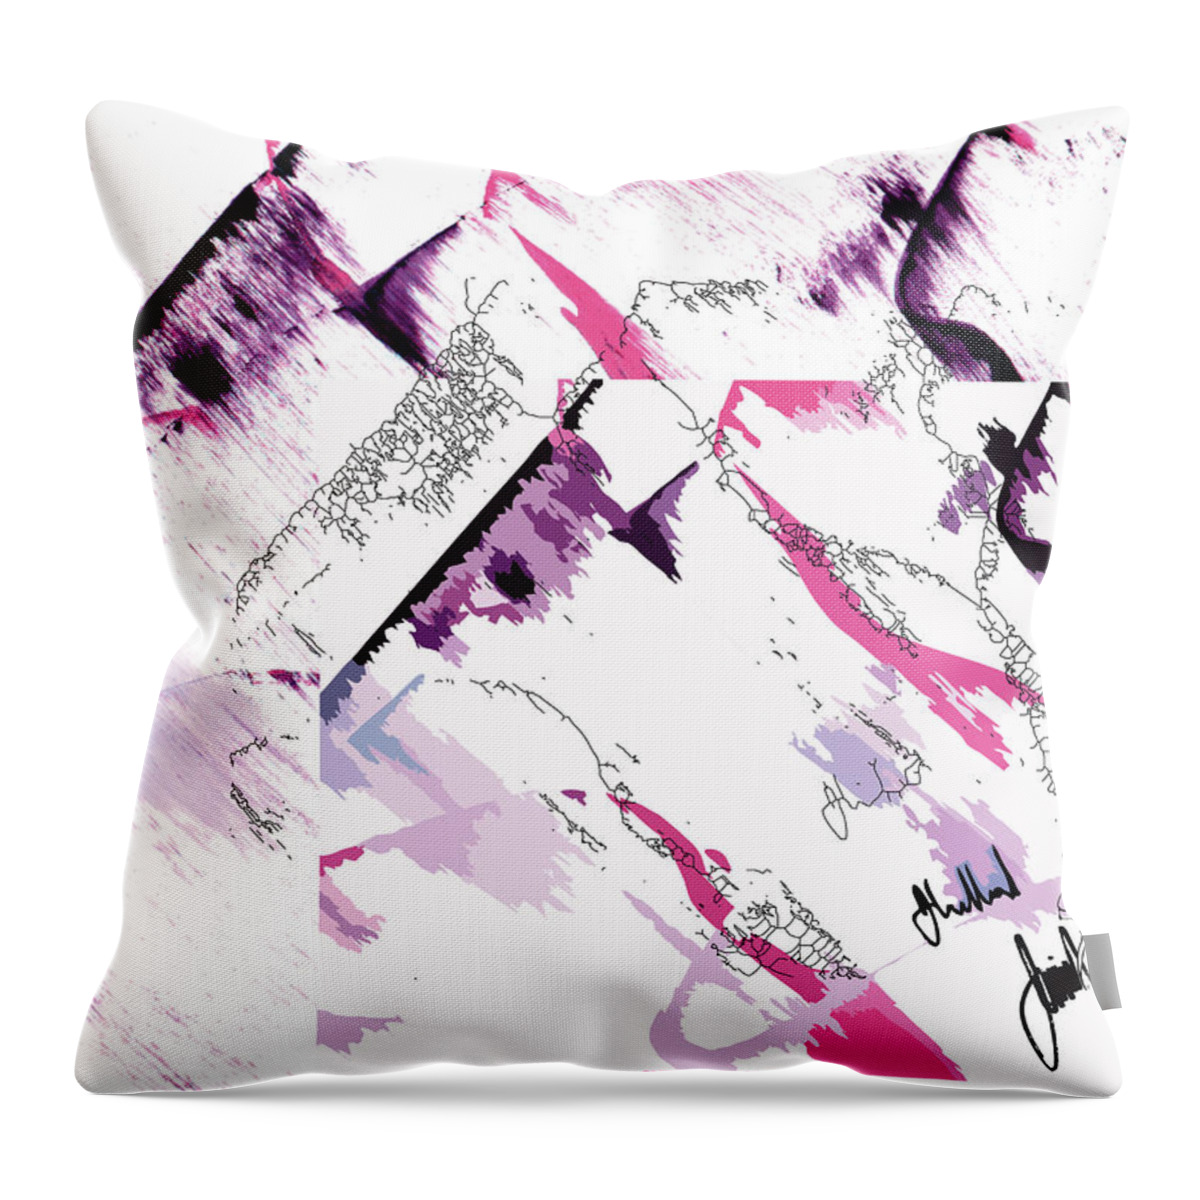  Throw Pillow featuring the digital art 3 Times Removed by Jimmy Williams